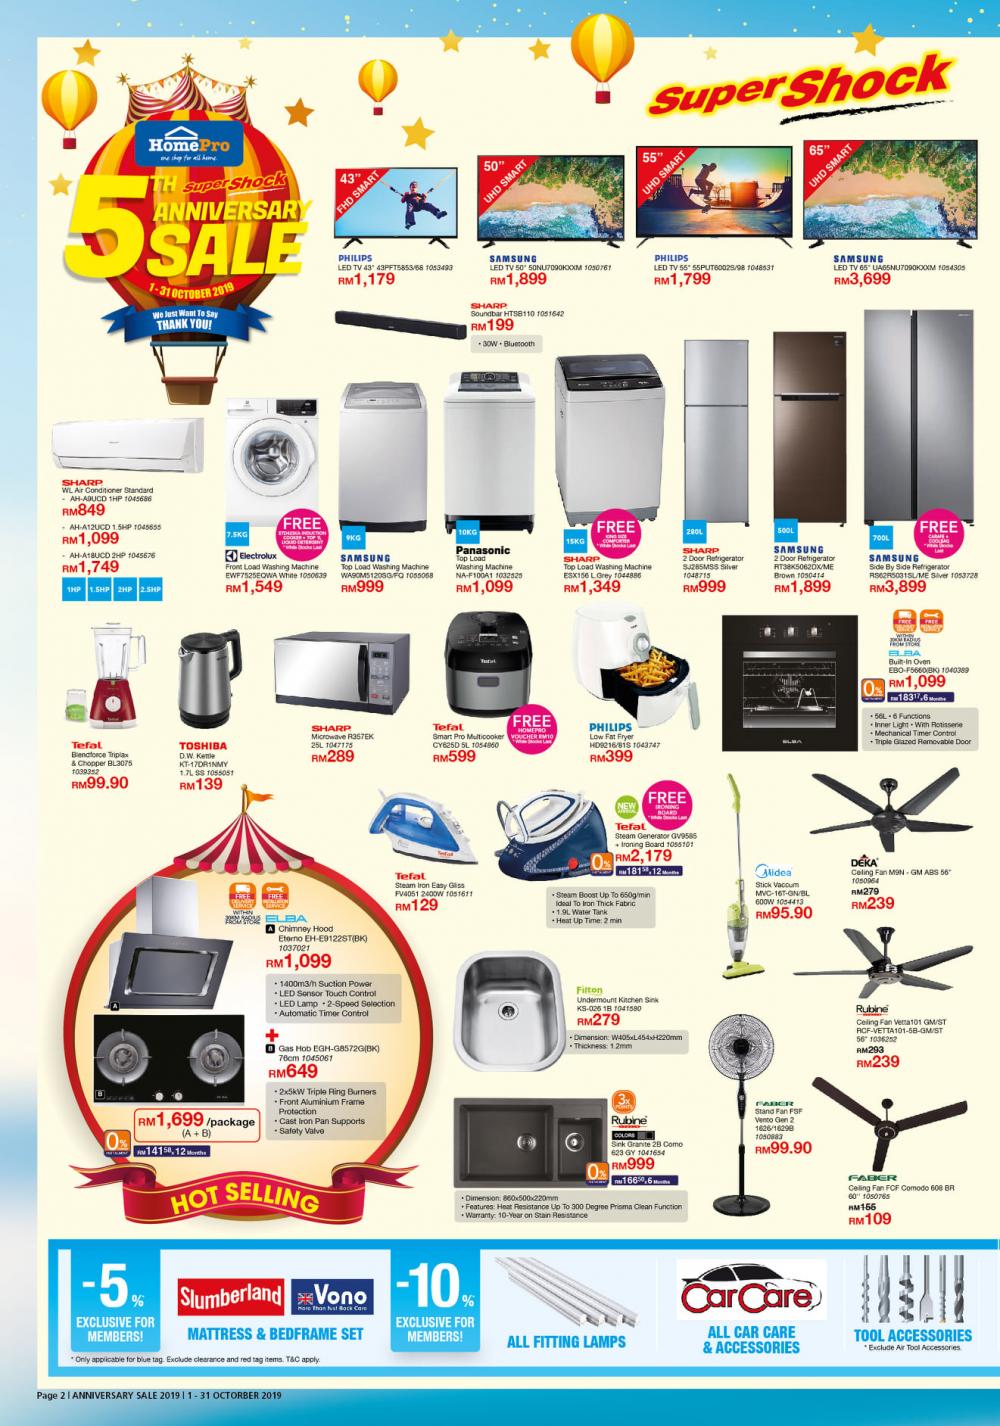 HomePro 5th Anniversary Sale Promotion Catalogue (1 October 2019 - 31 October 2019)